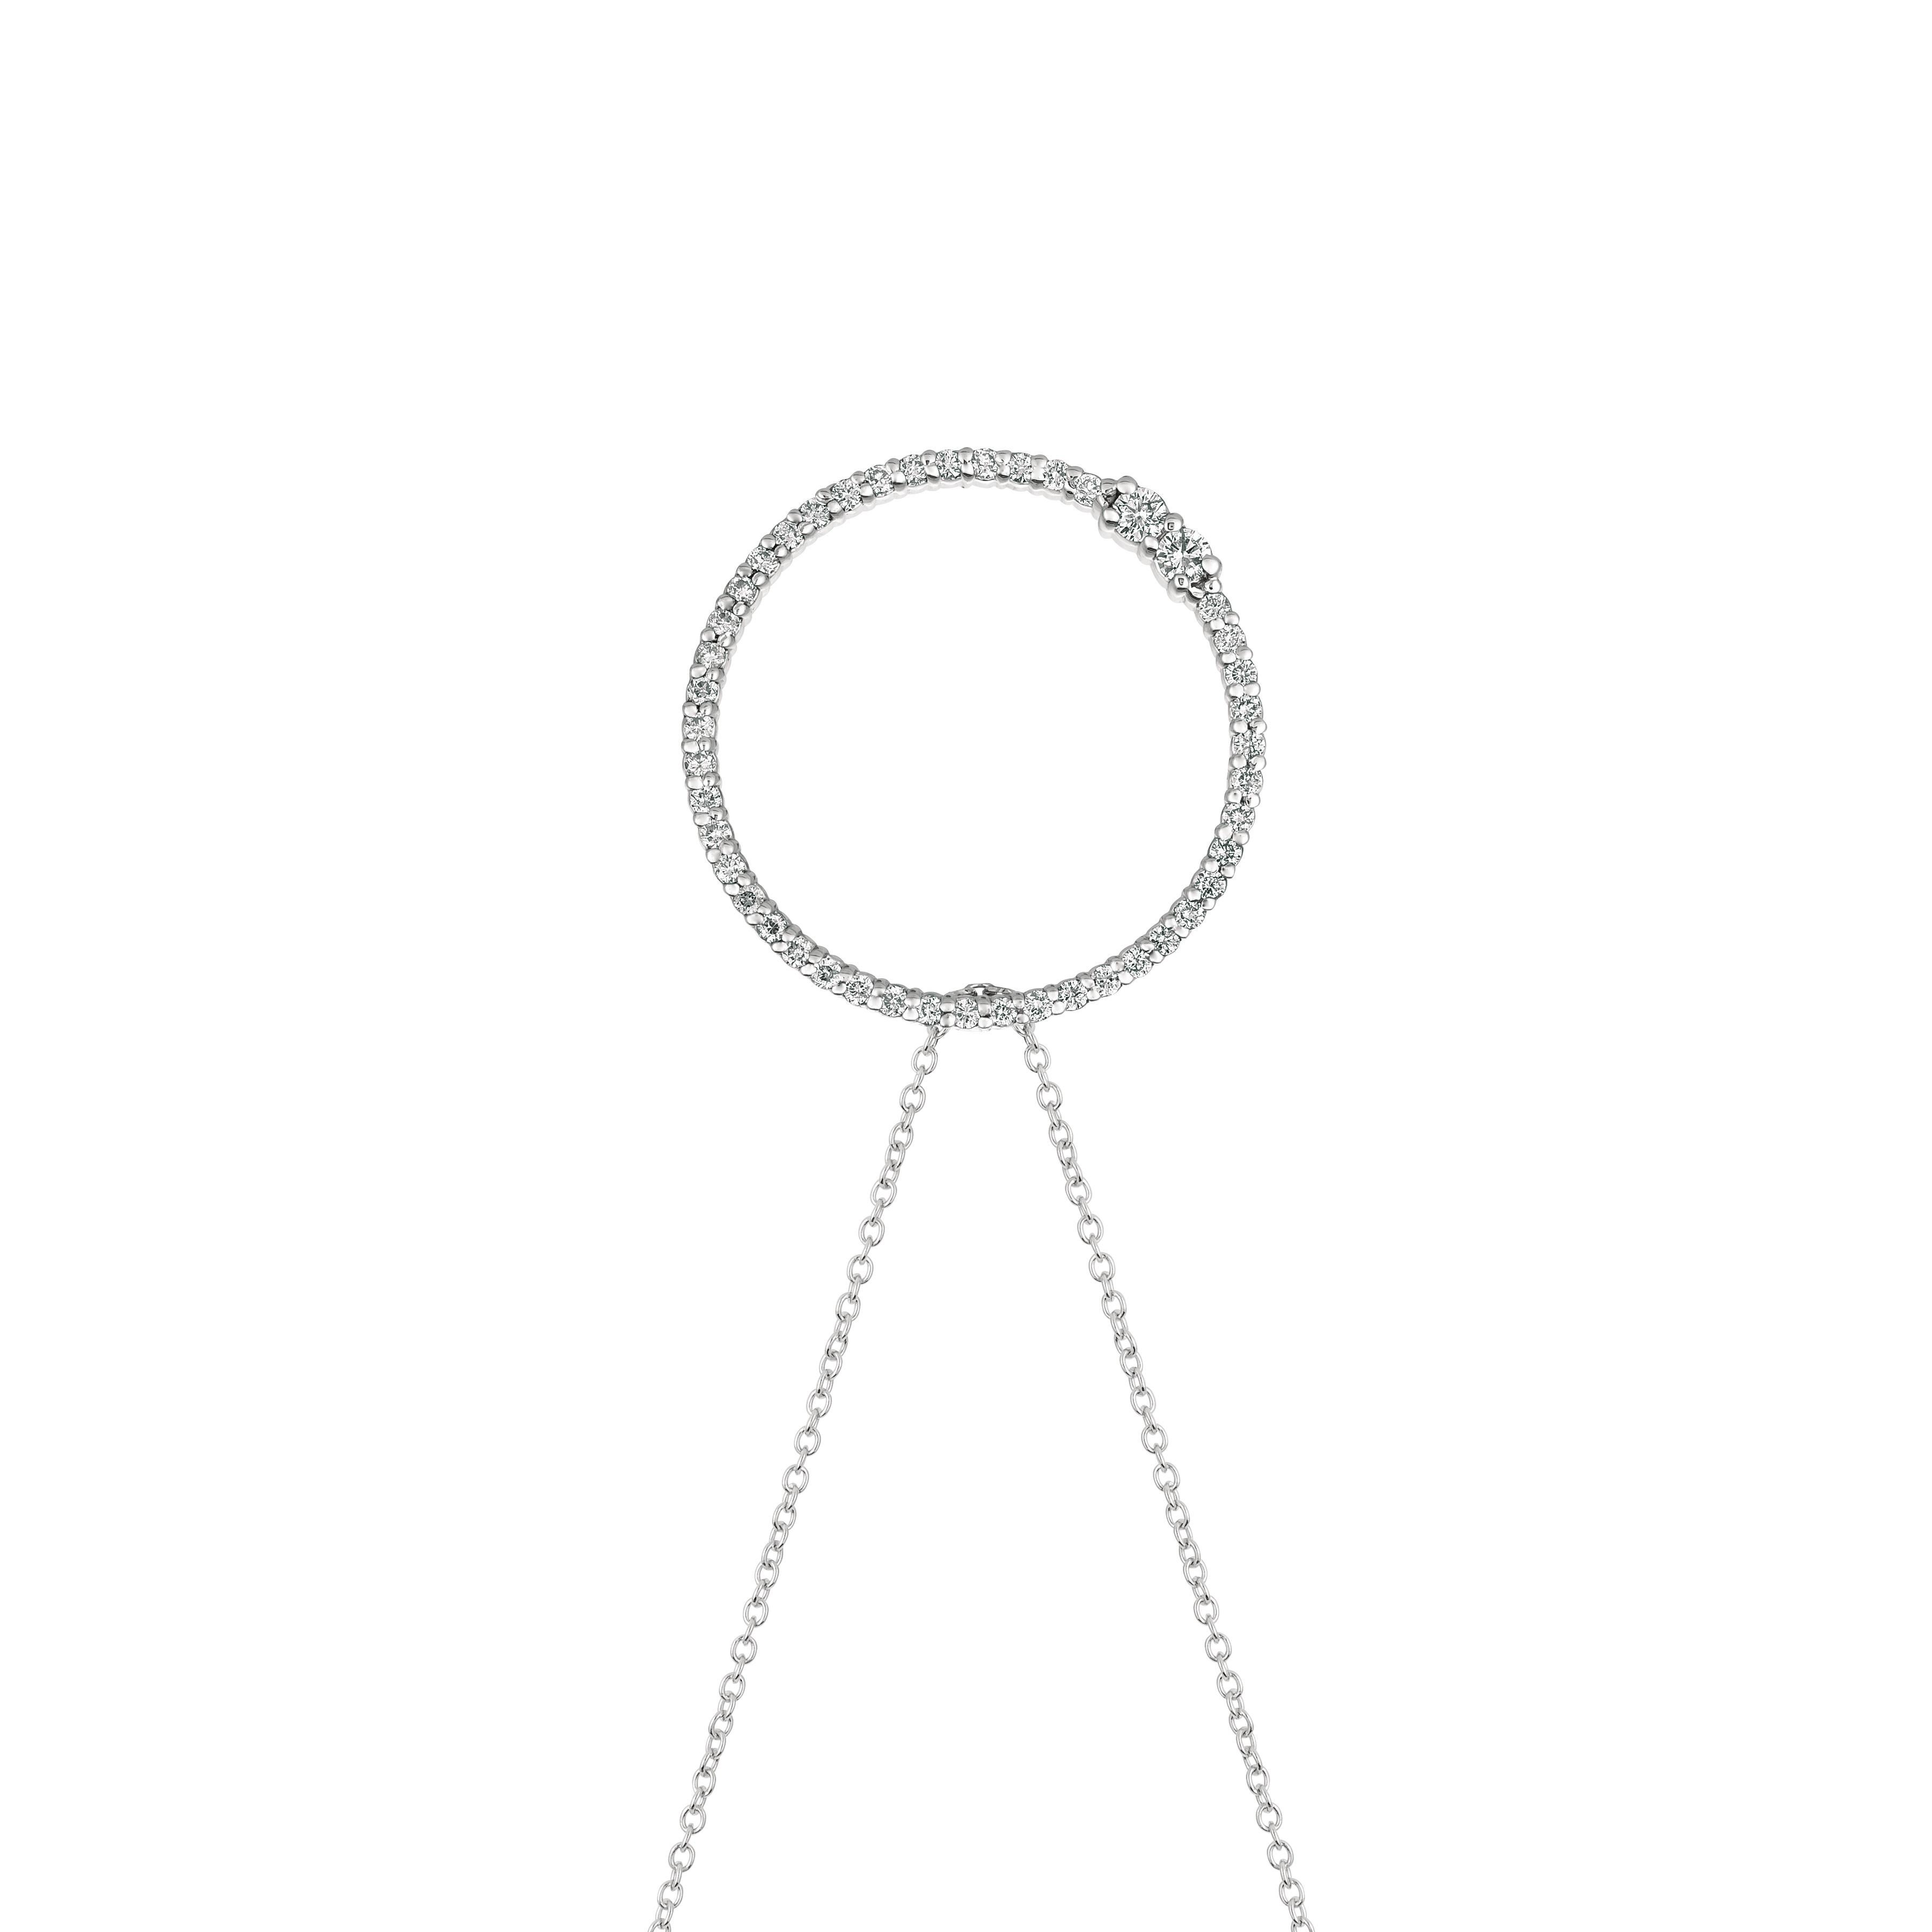 0.50 Carat Natural Diamond Circle Necklace 14K White Gold G SI 18 inches chain

100% Natural Diamonds, Not Enhanced in any way Round Cut Diamond Necklace
0.50CT
G-H
SI
14K White Gold, Pave style , 3.8 grams
15/16 inch in height, 15/16 inches in